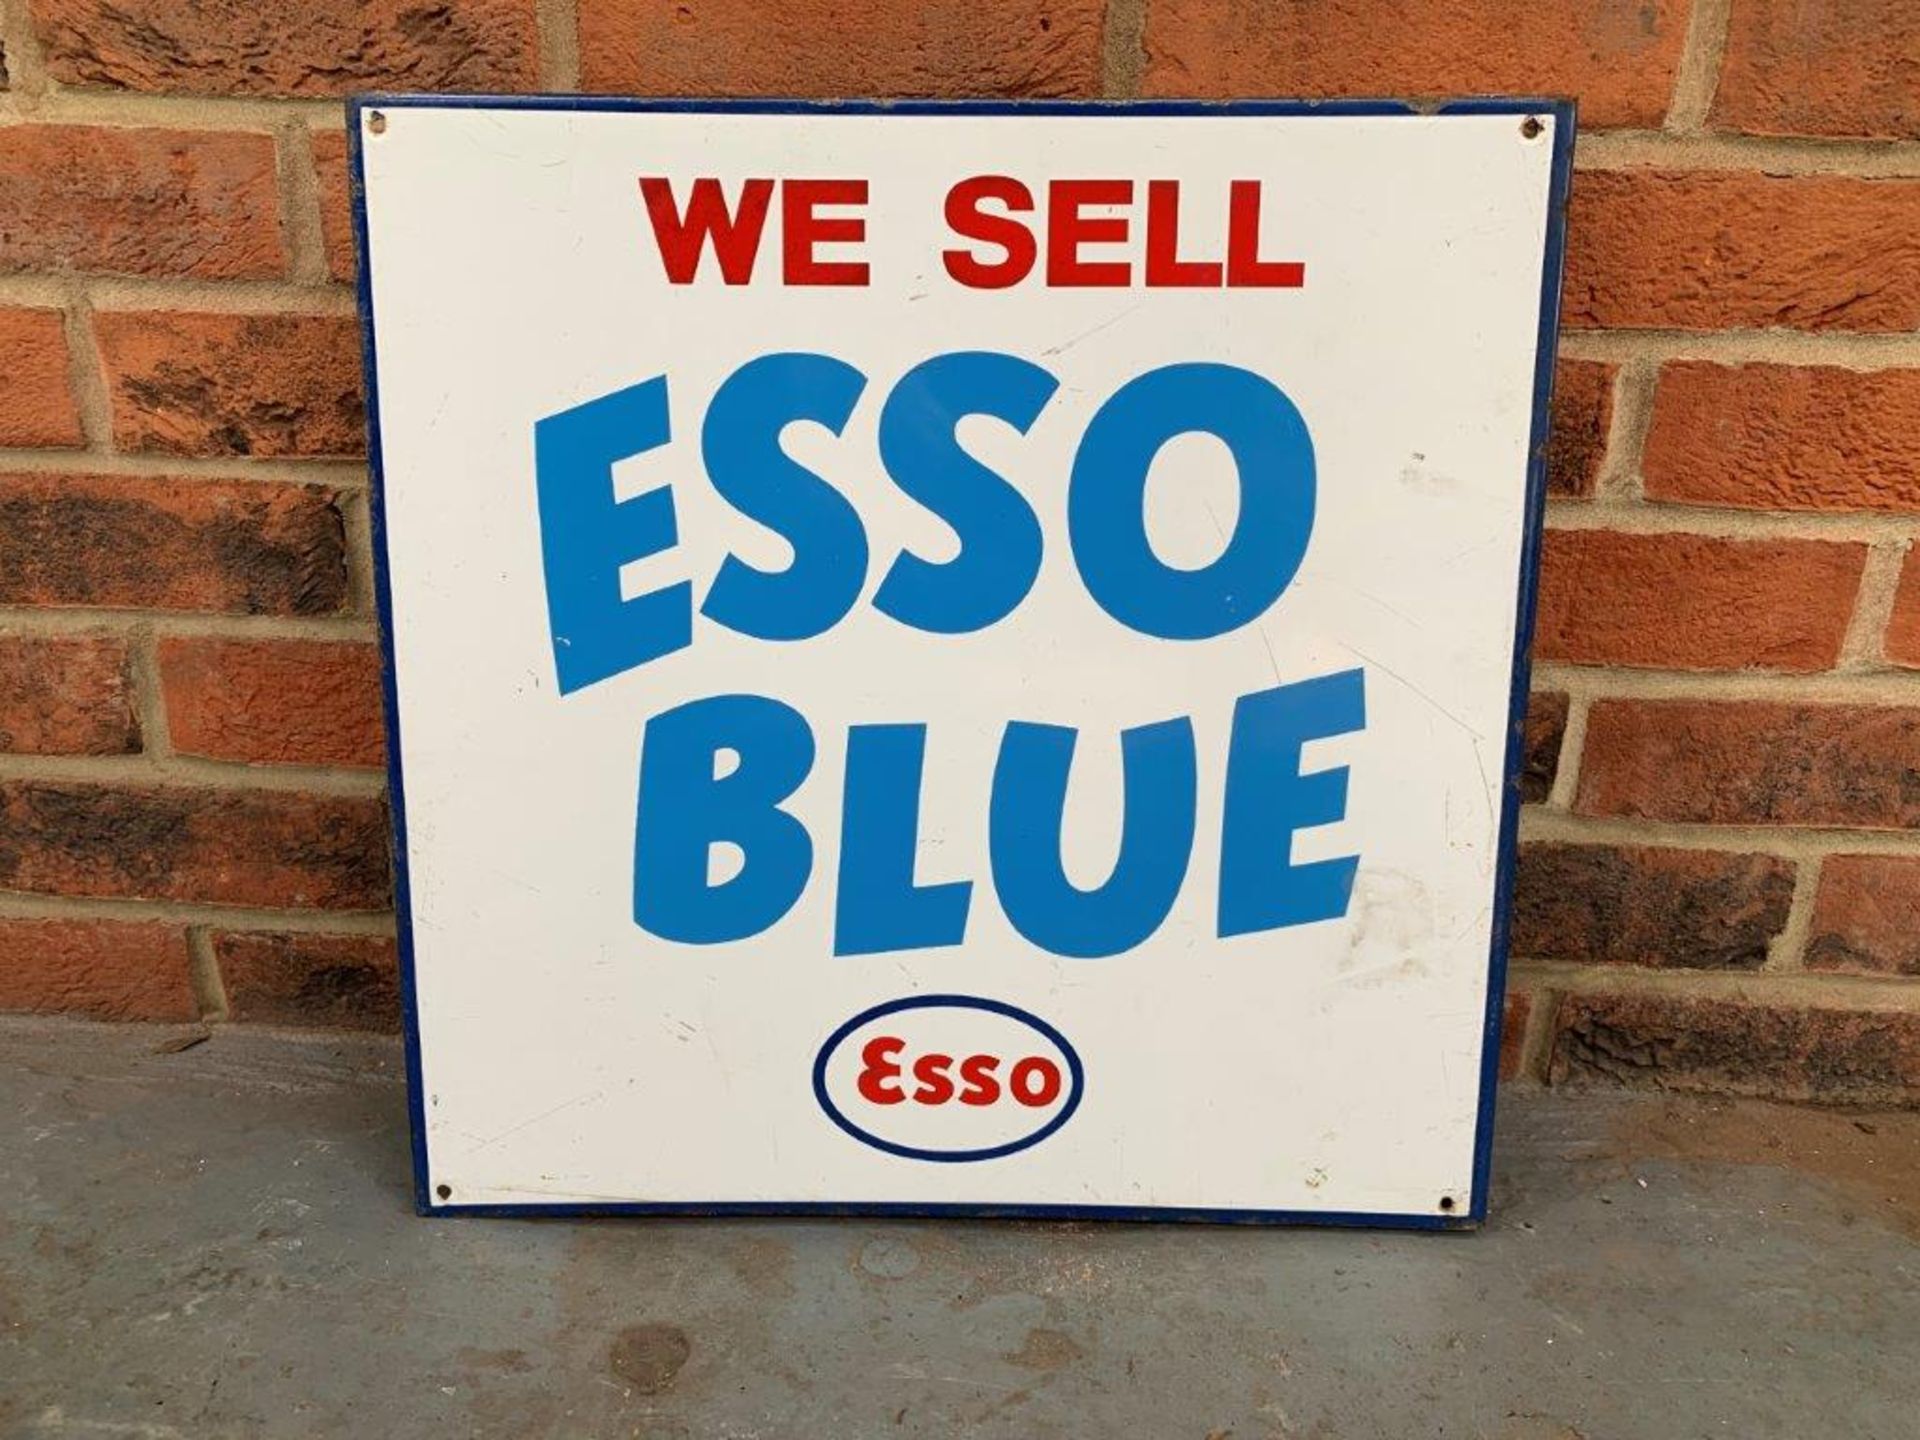 Enamel Flanged Double Sided We Sell Esso Blue" Sign"